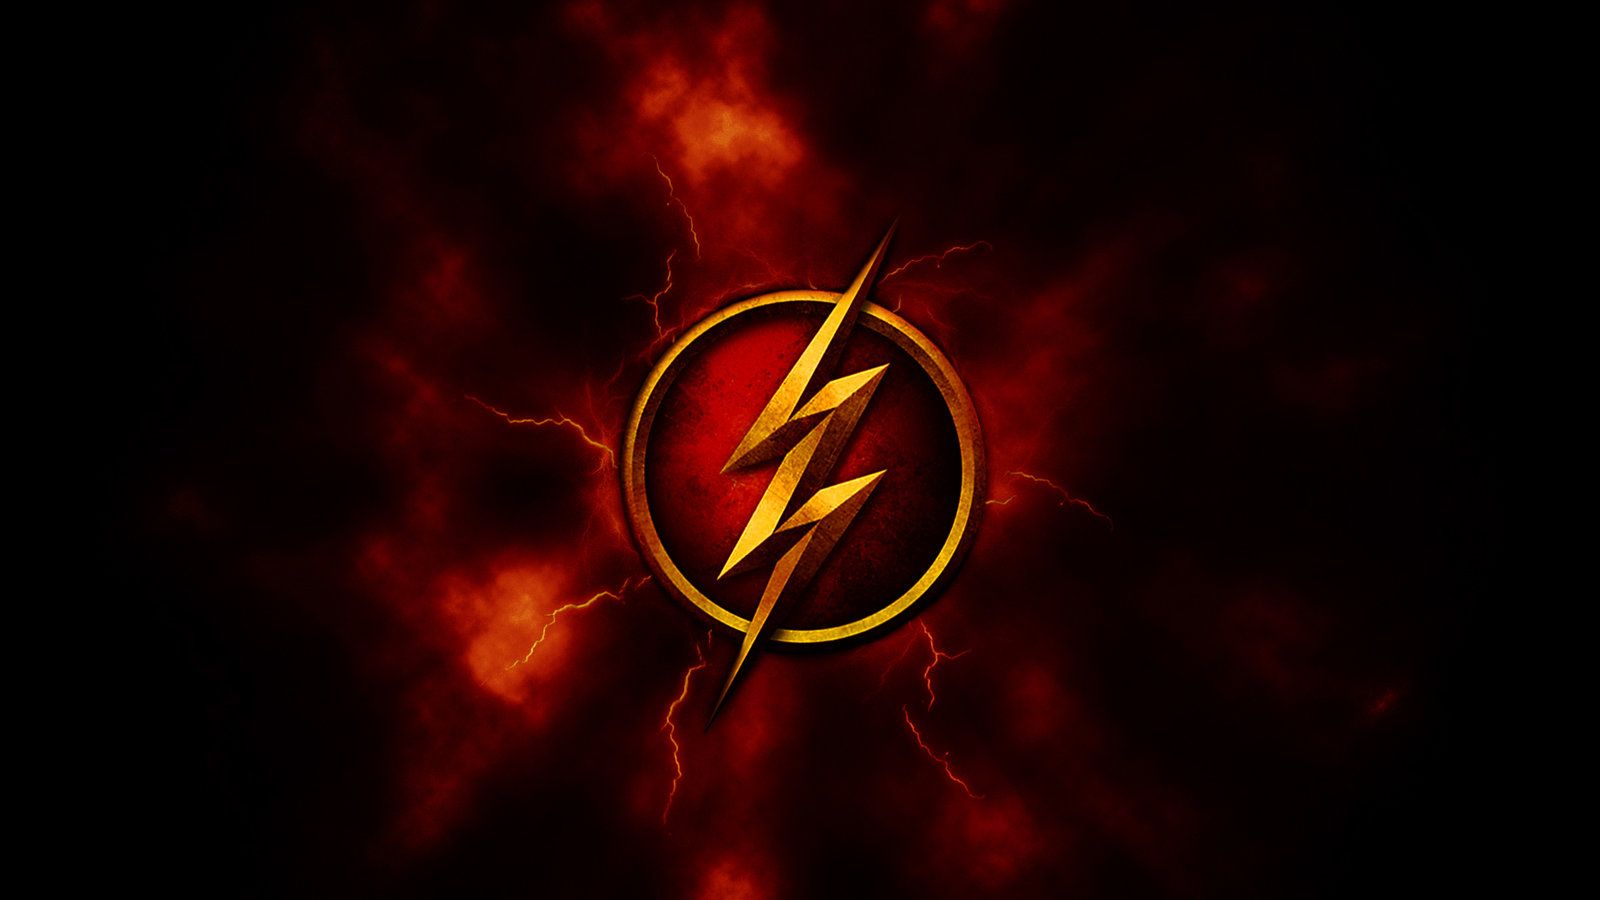 rePin image: The Flash Wallpaper on Pinterest